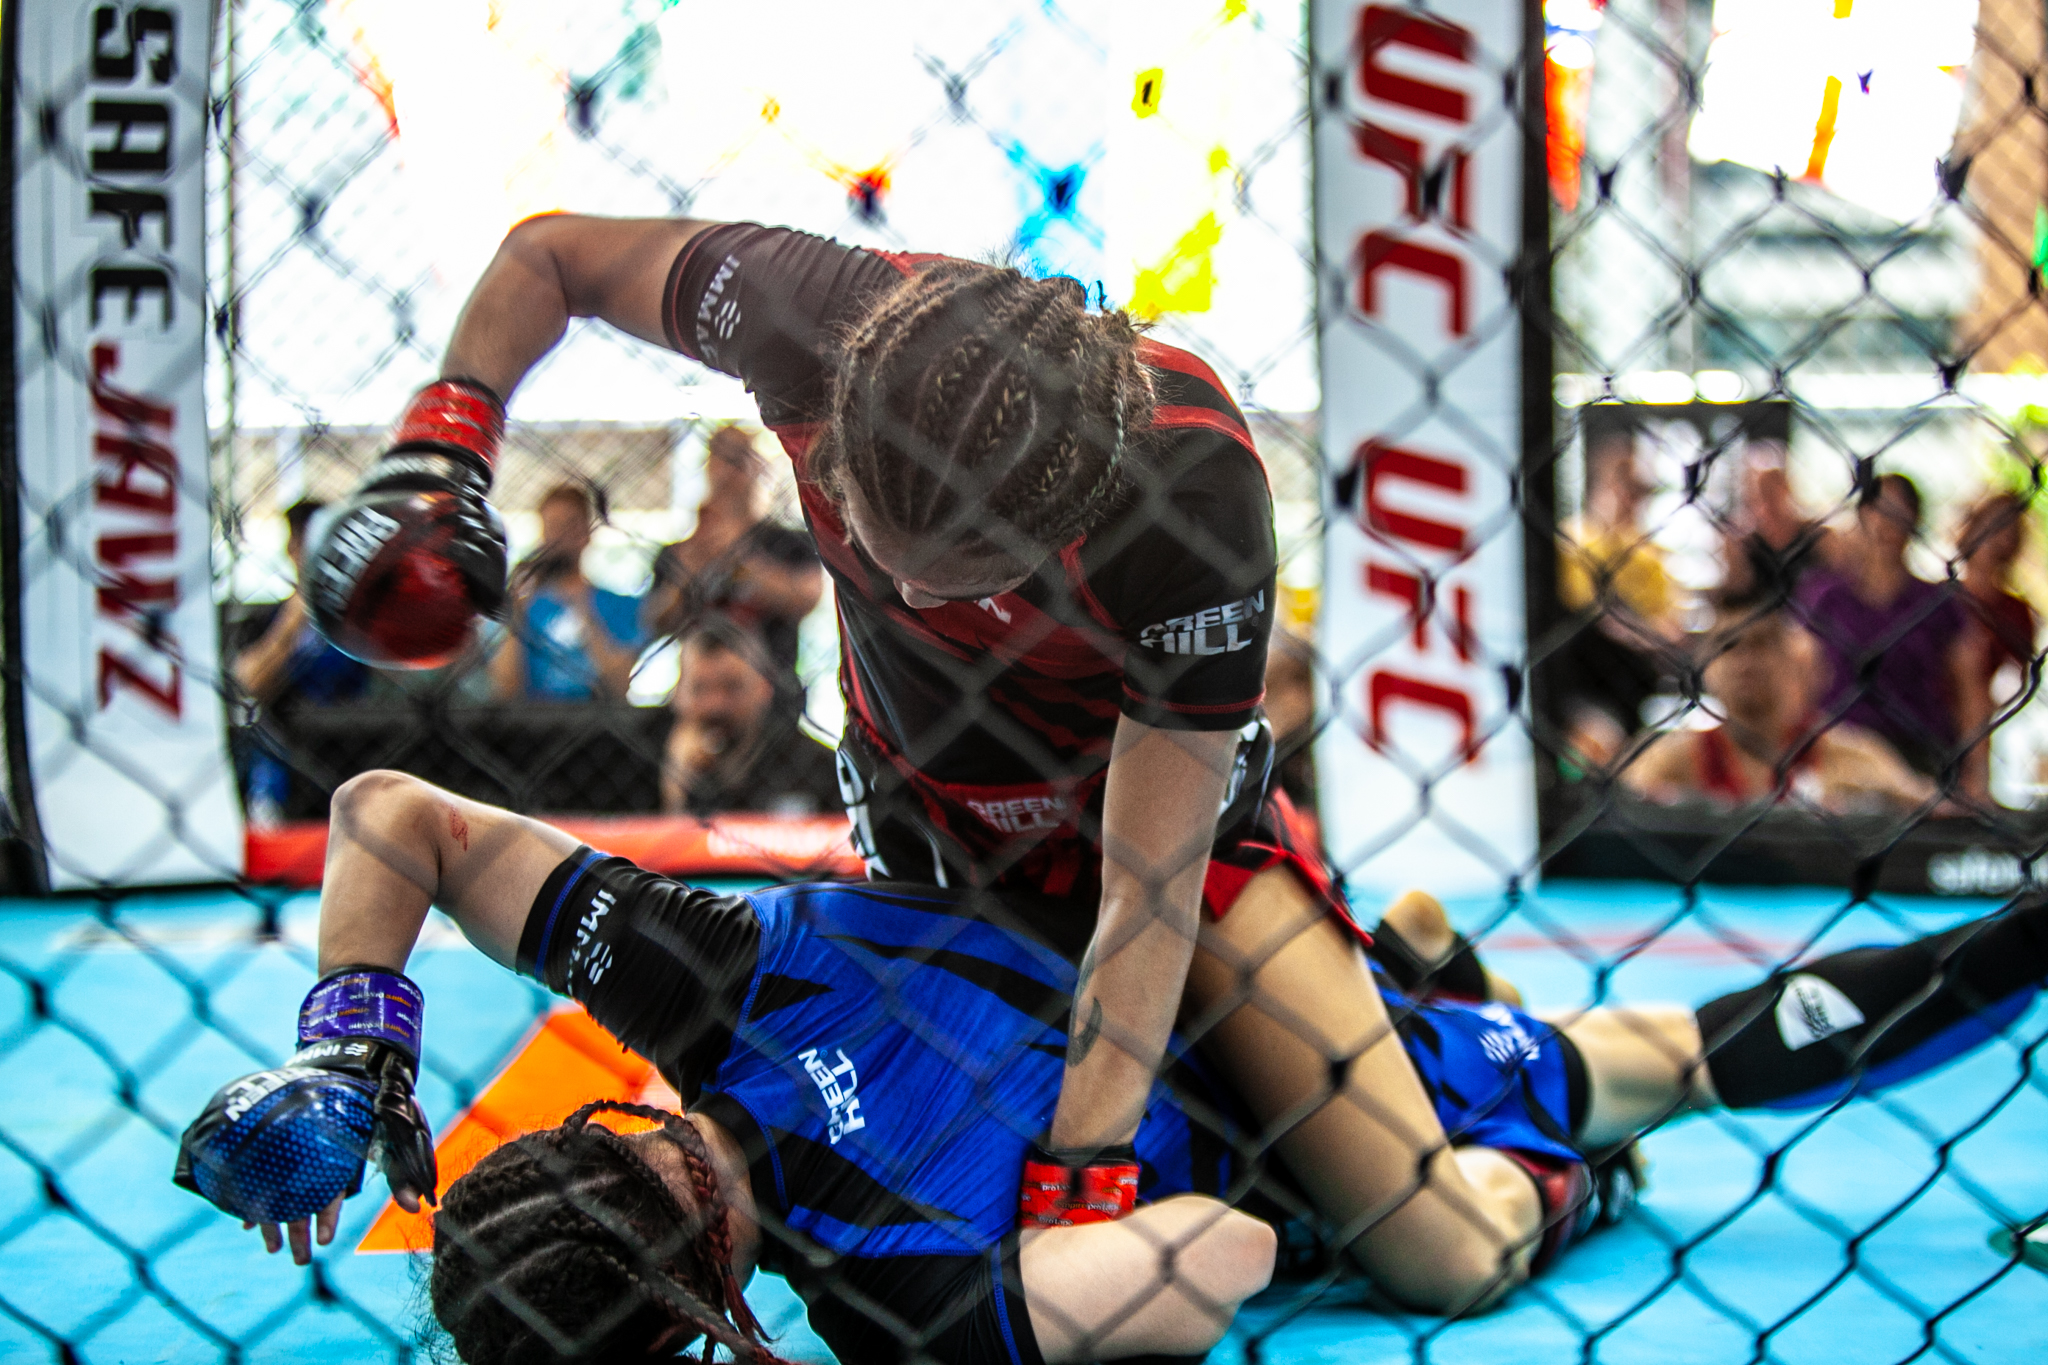 Watch Live & On-Demand: 2019 European Open Championships at immaf.tv